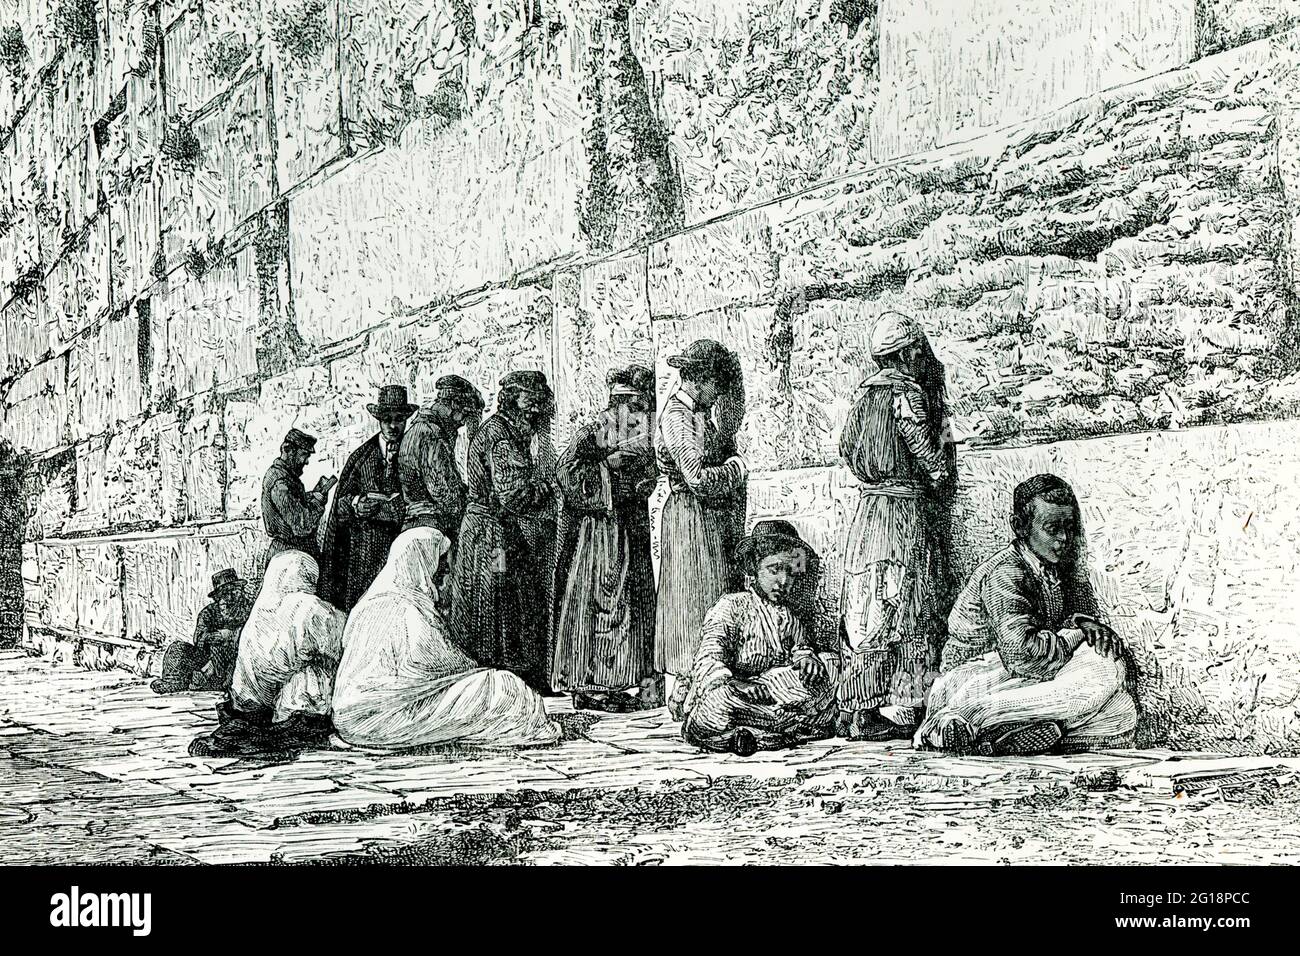 This 1880s illustration shows “Jews wailing lean against wall of Jerusalem.” The Wailing Wall or Western Wall, known in Islam as the Buraq Wall, is an ancient limestone wall in the Old City of Jerusalem. It is a relatively small segment of a far longer ancient retaining wall, known also in its entirety as the 'Western Wall'. The wall was originally erected as part of the expansion of the Second Jewish Temple begun by Herod the Great, which resulted in the encasement of the natural, steep hill known to Jews and Christians as the Temple Mount, in a huge rectangular structure topped by a flat pla Stock Photo